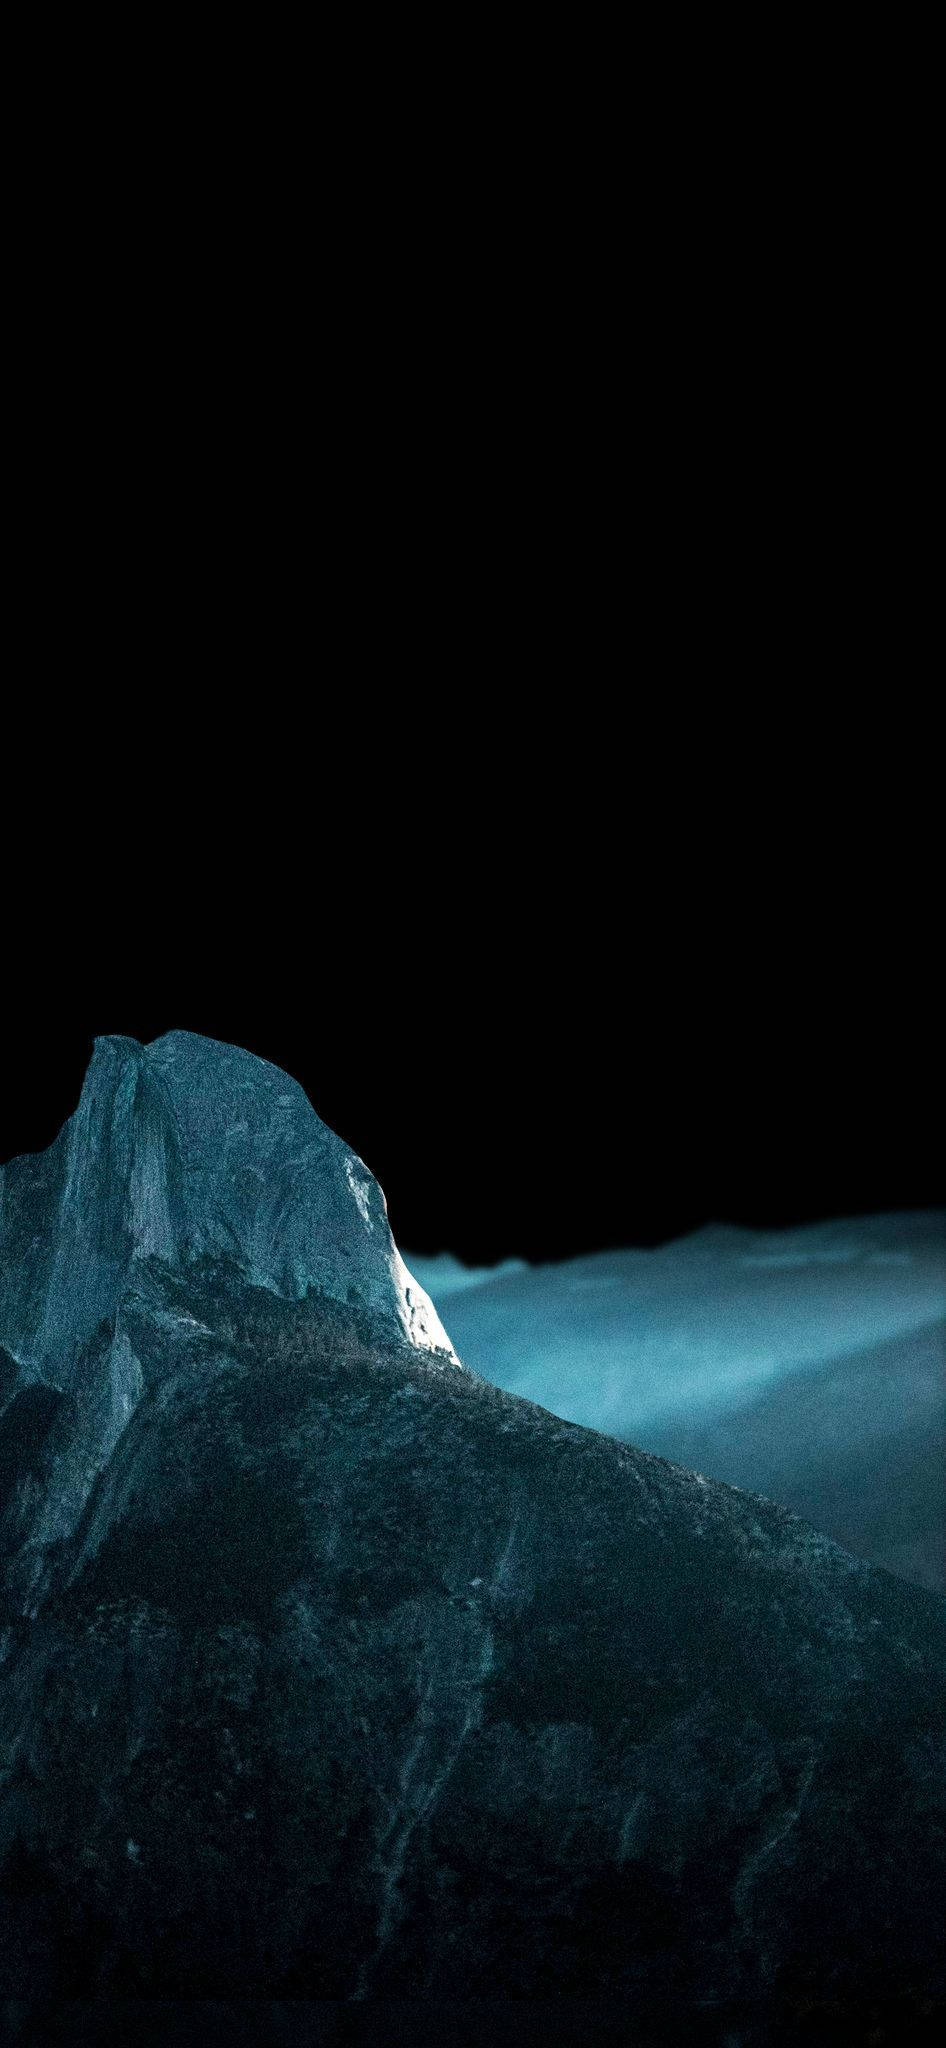 Download Winter Mountain Oled iPhone Wallpaper